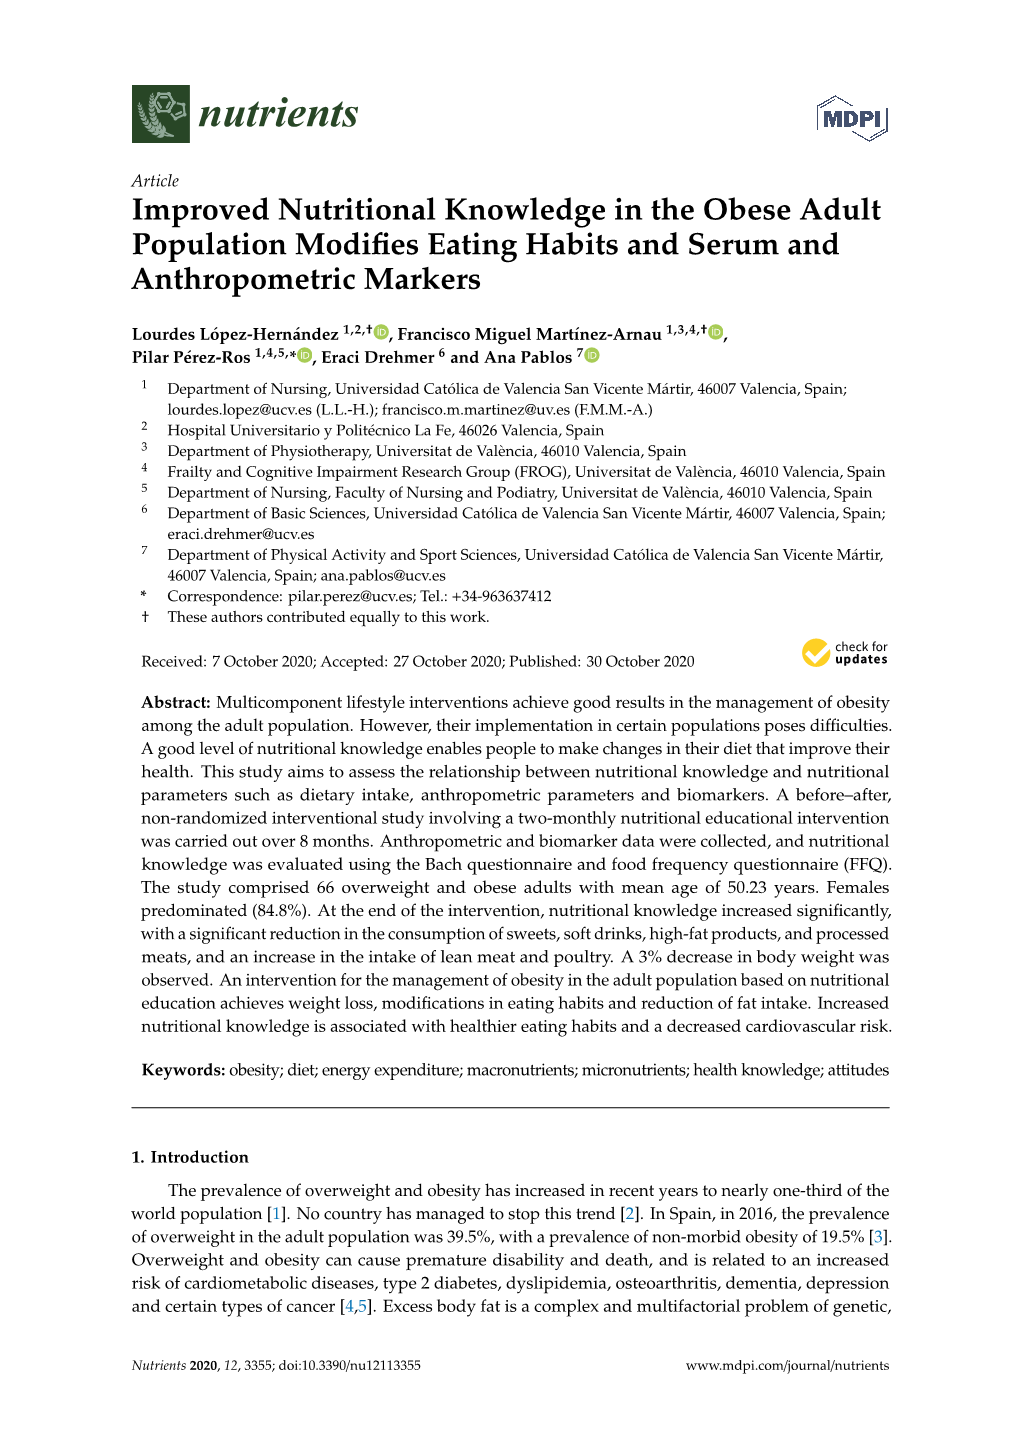 Improved Nutritional Knowledge in the Obese Adult Population Modifies